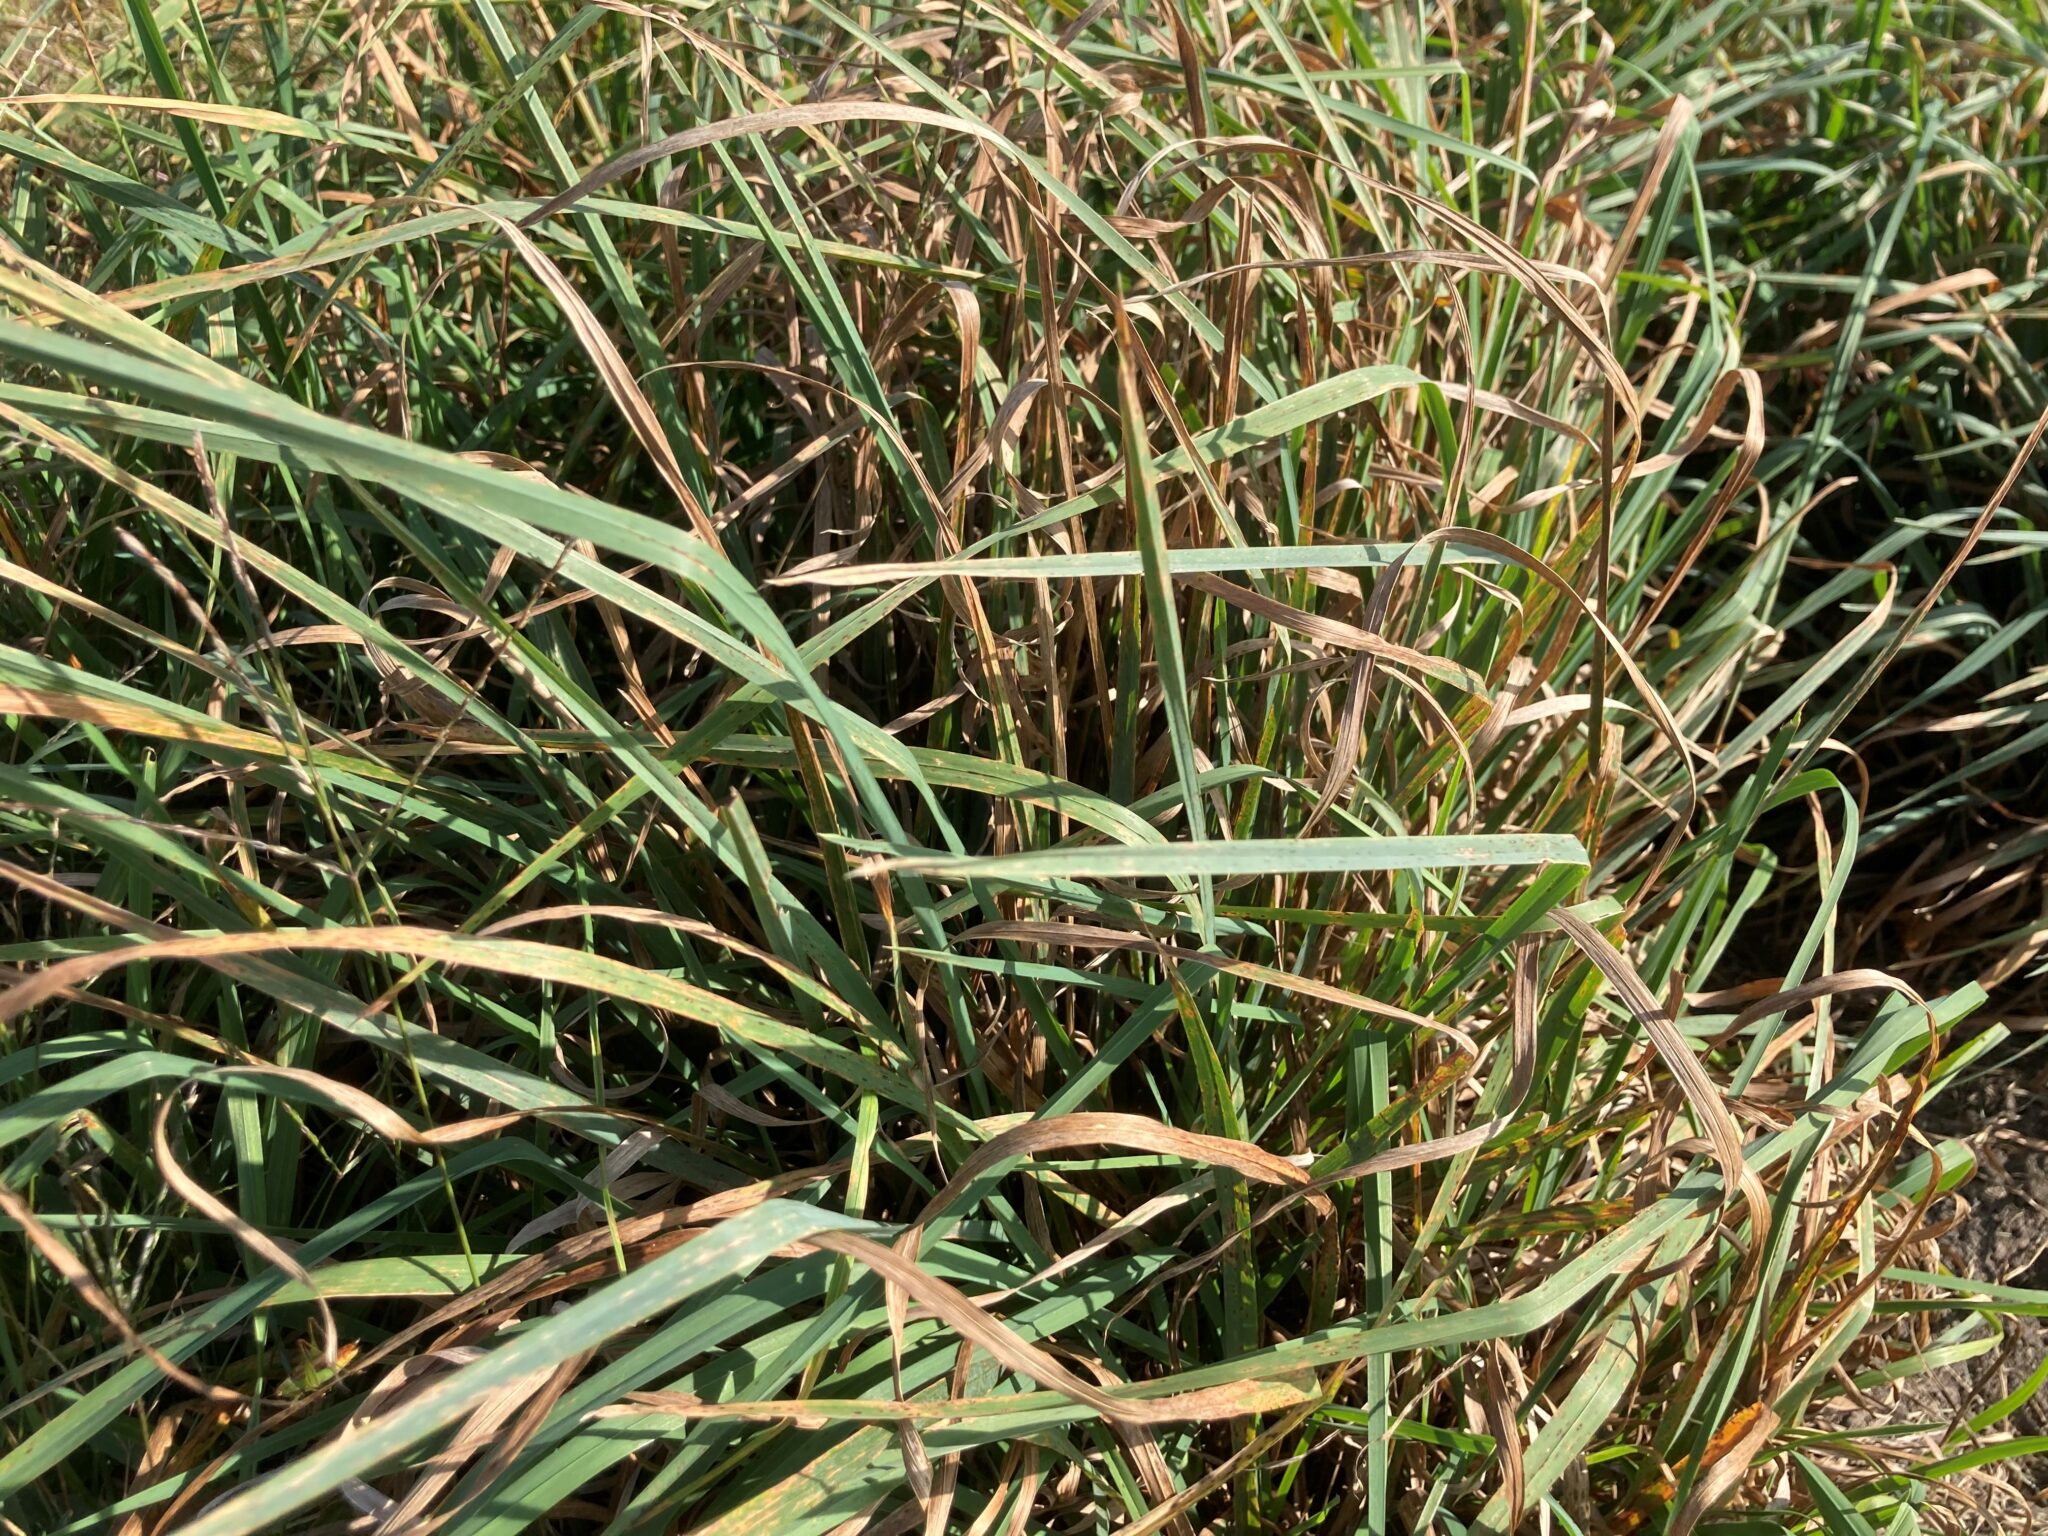 Forage variety selection is an important consideration. The orchardgrass variety on the left has better leaf health than the variety on the right. Yield and quality is less with the more leaf diseased variety. (Photo Credit: Keith Johnson)